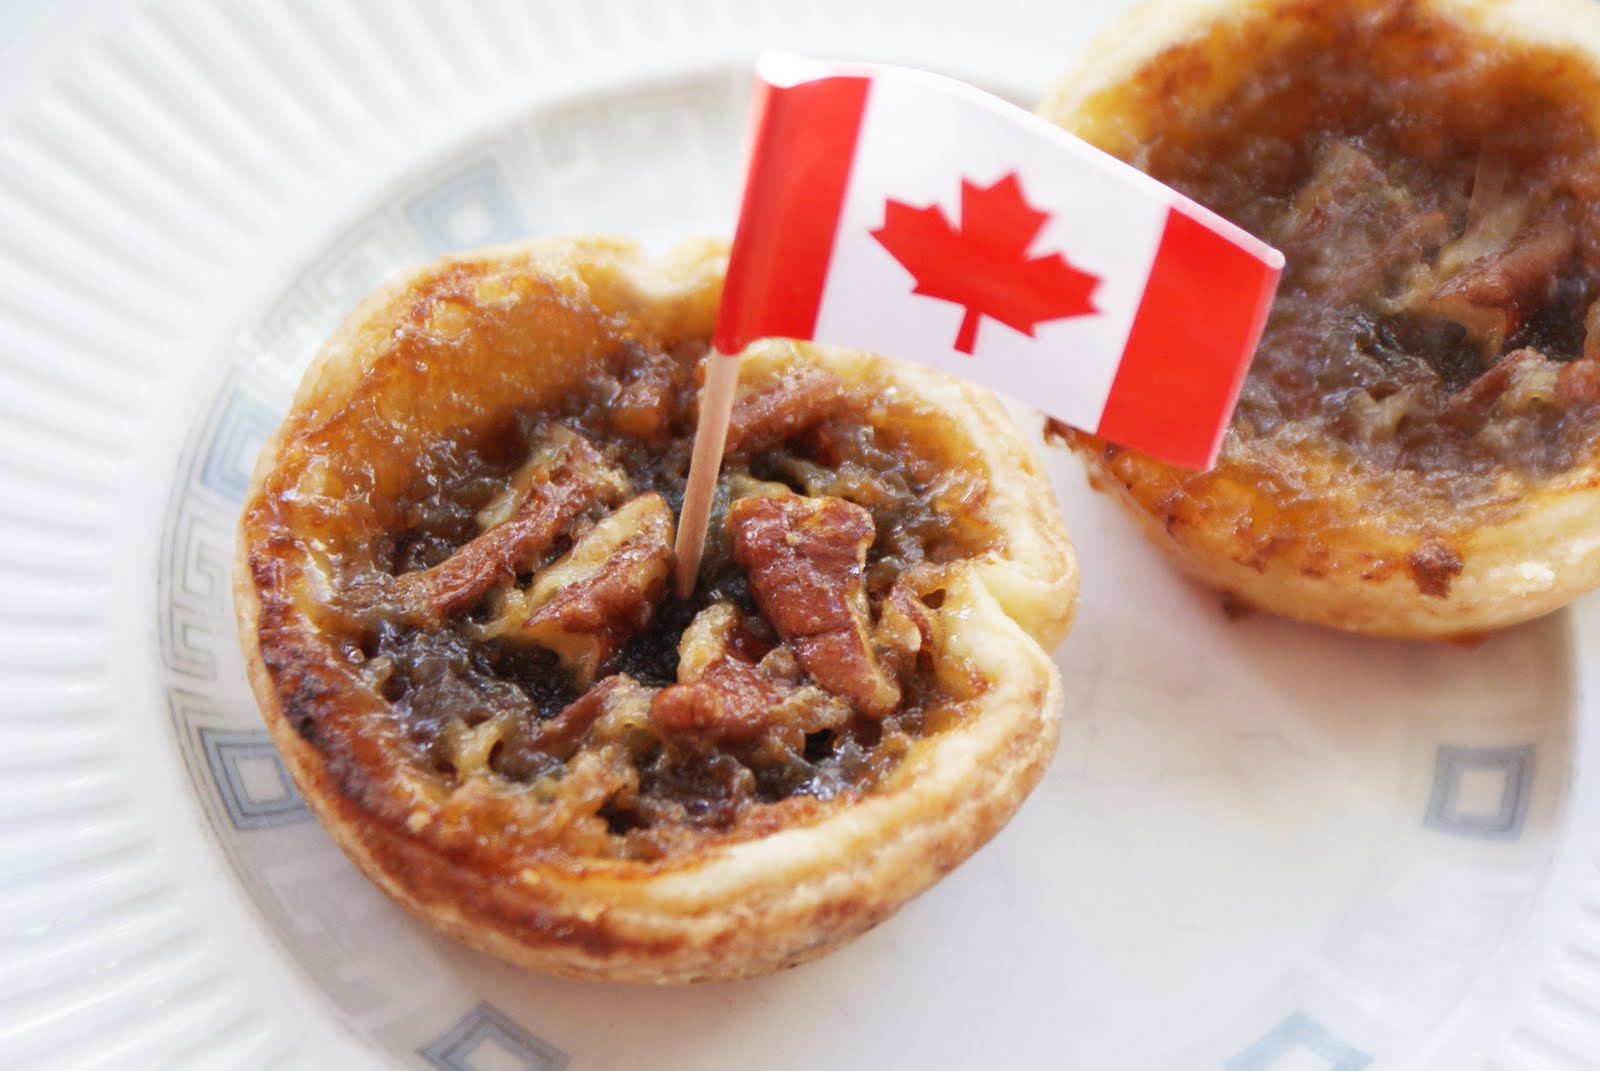 Canadian butter tarts